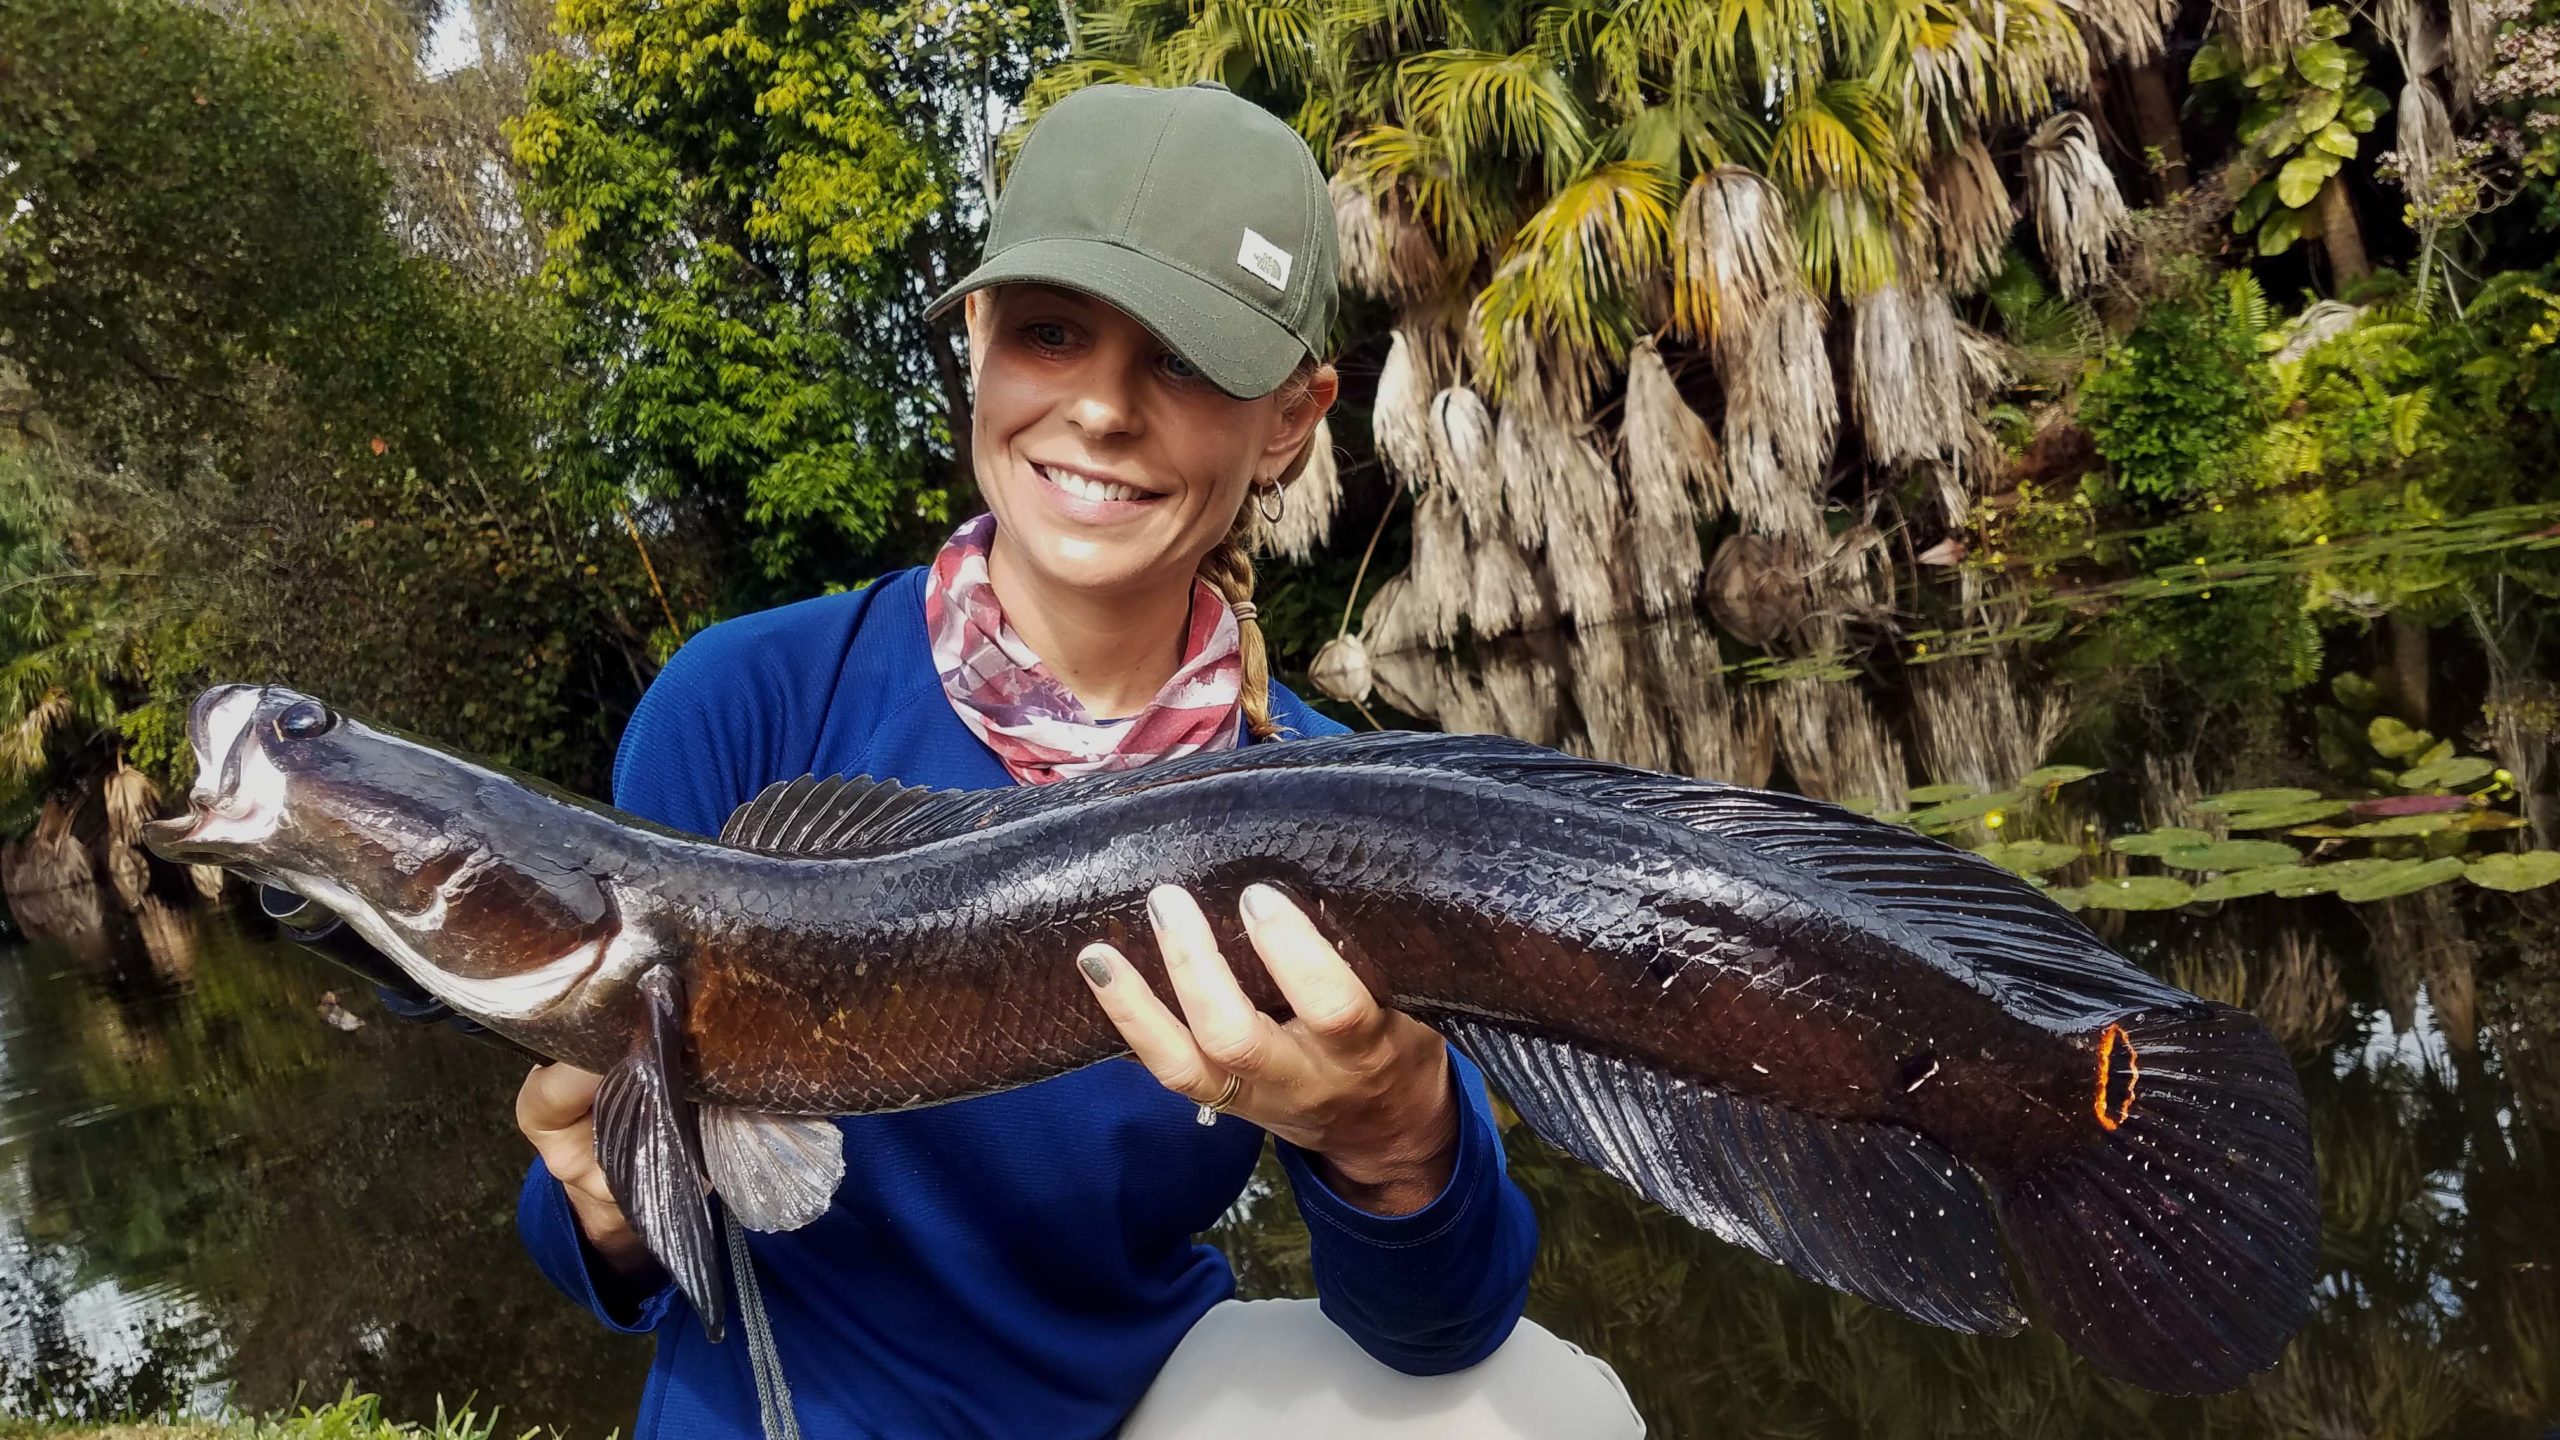 How the Snakehead Earned a Spot on Freshwater Bucket Lists